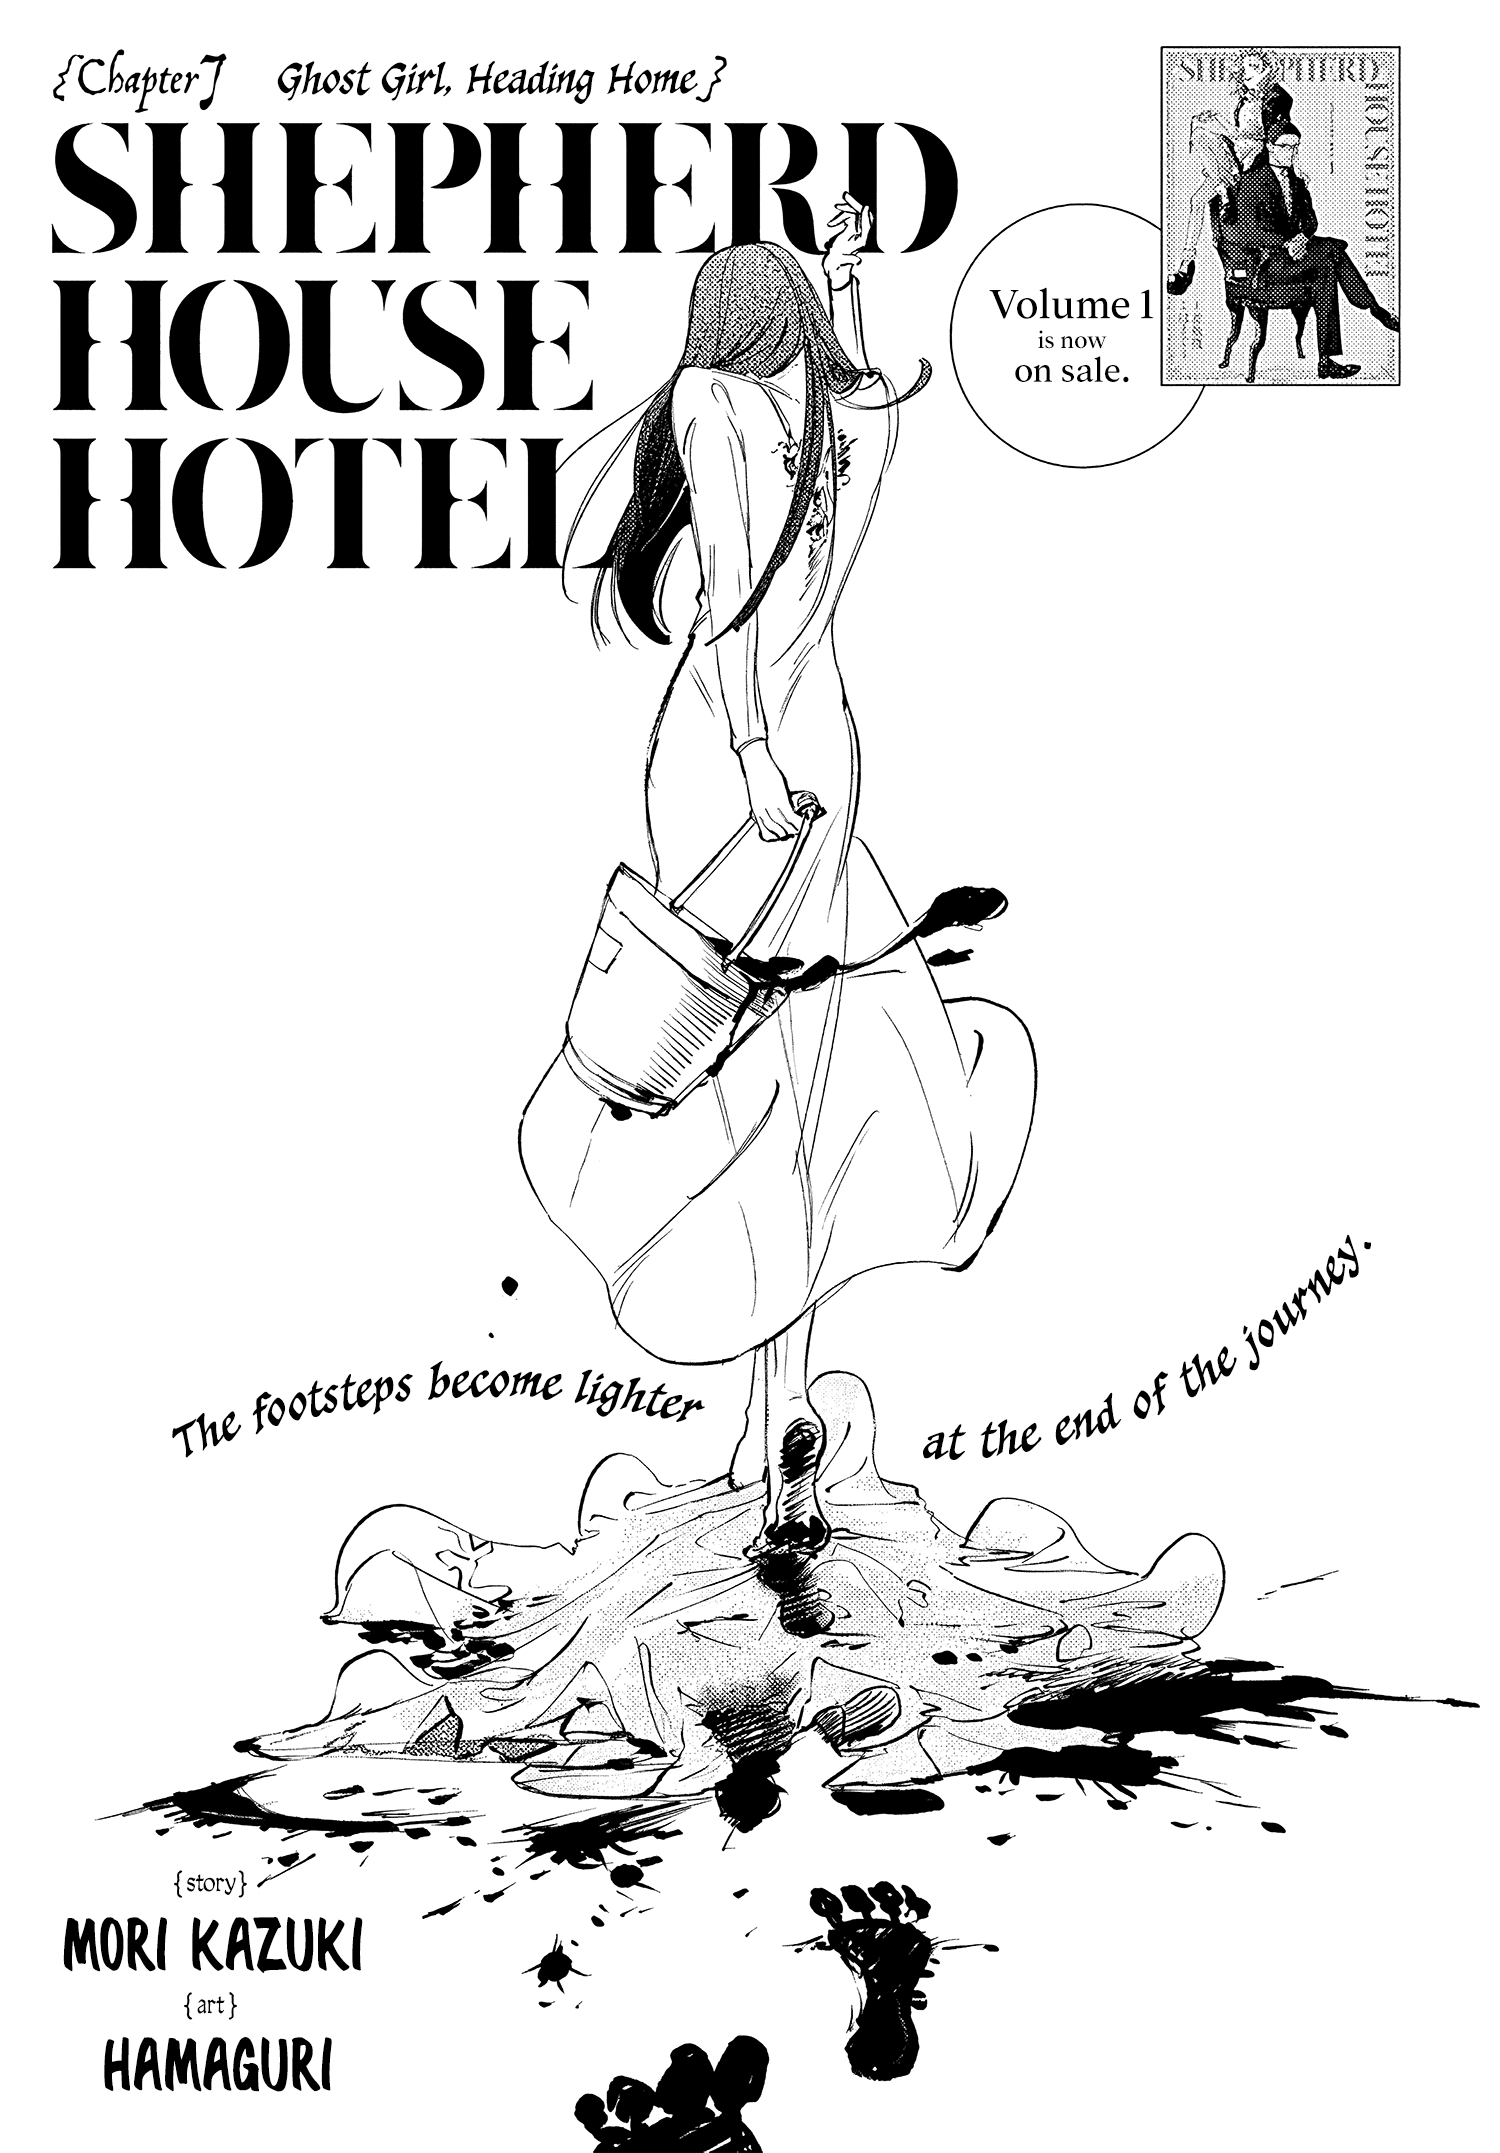 Shepherd House Hotel Vol.2 Chapter 7: Ghost Girl, Heading Home - Picture 2